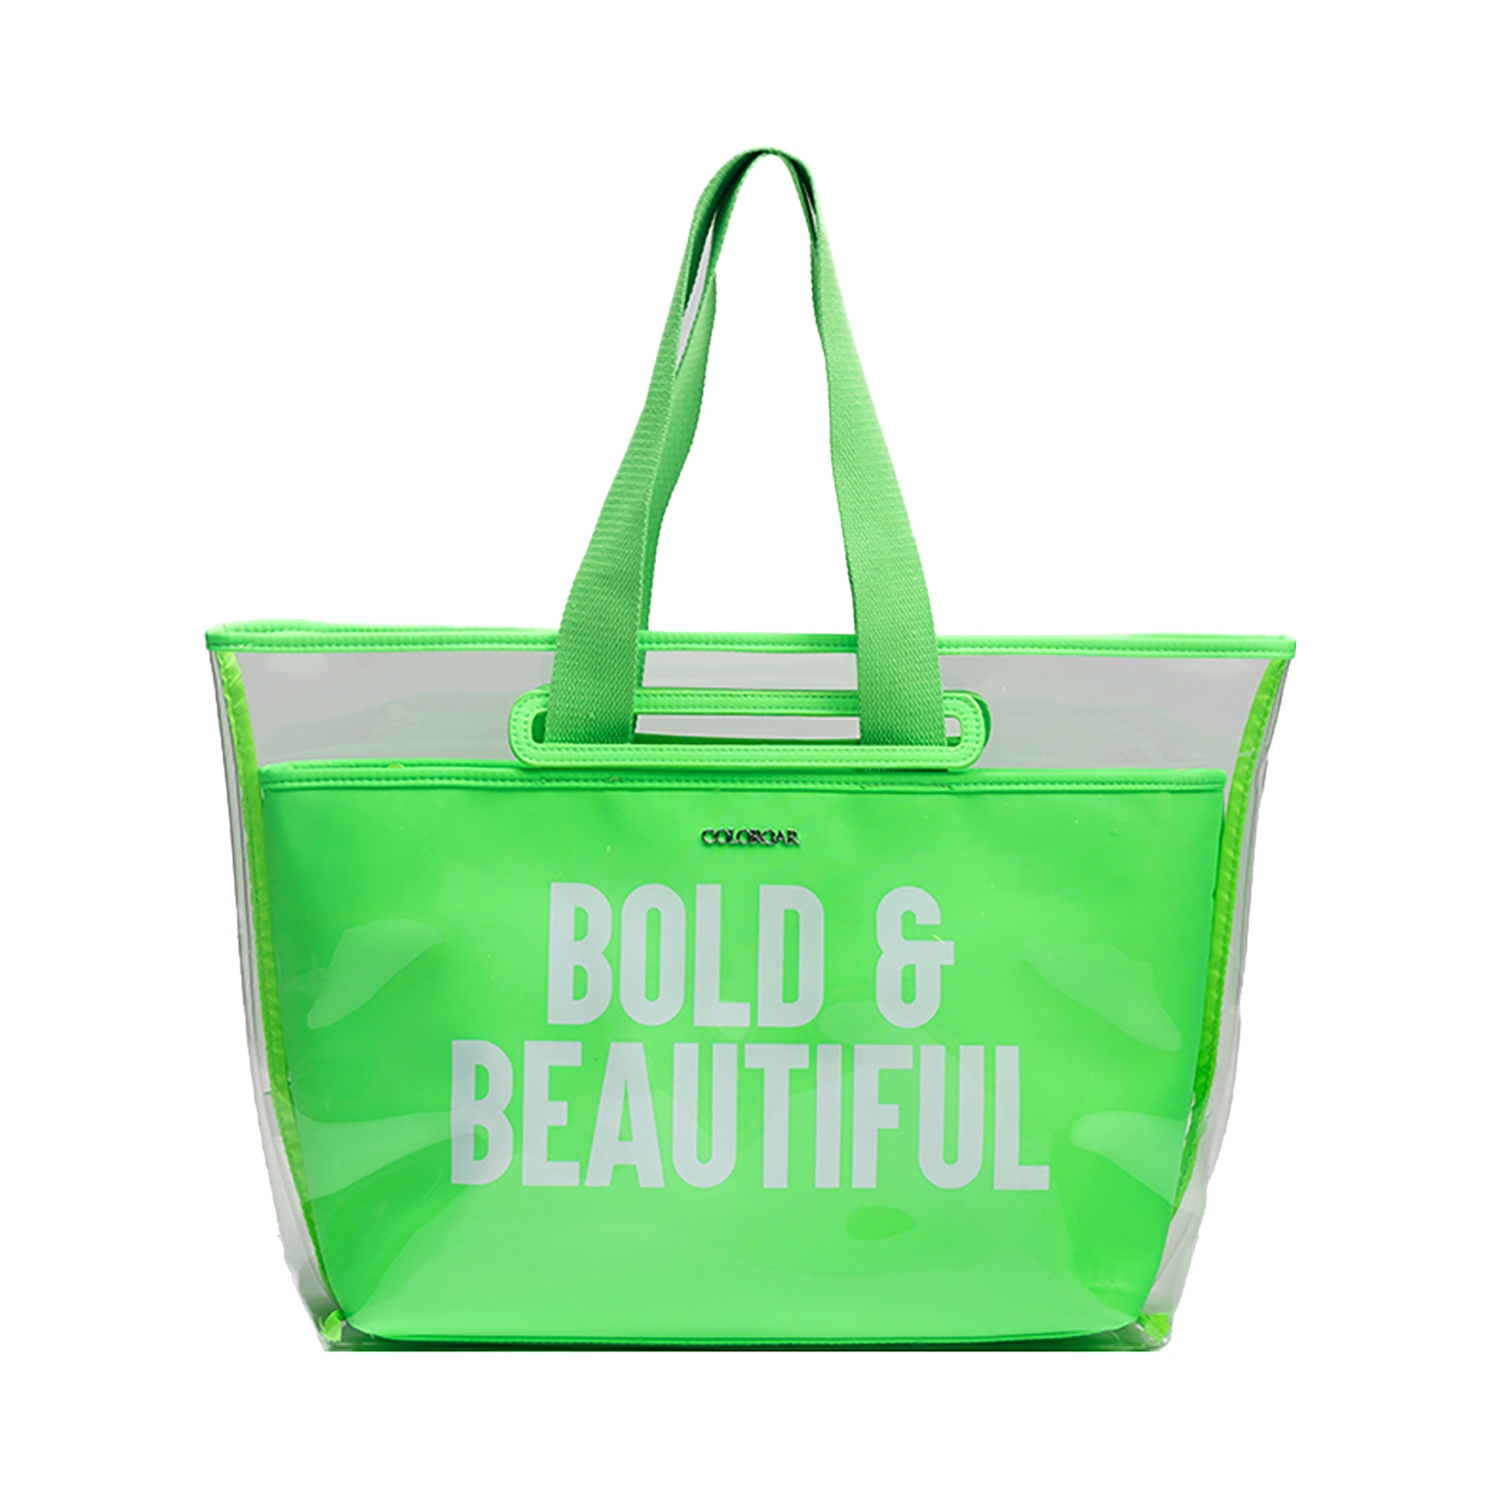 Colorbar | Colorbar The Bold & Beautiful Tote - Neon Green